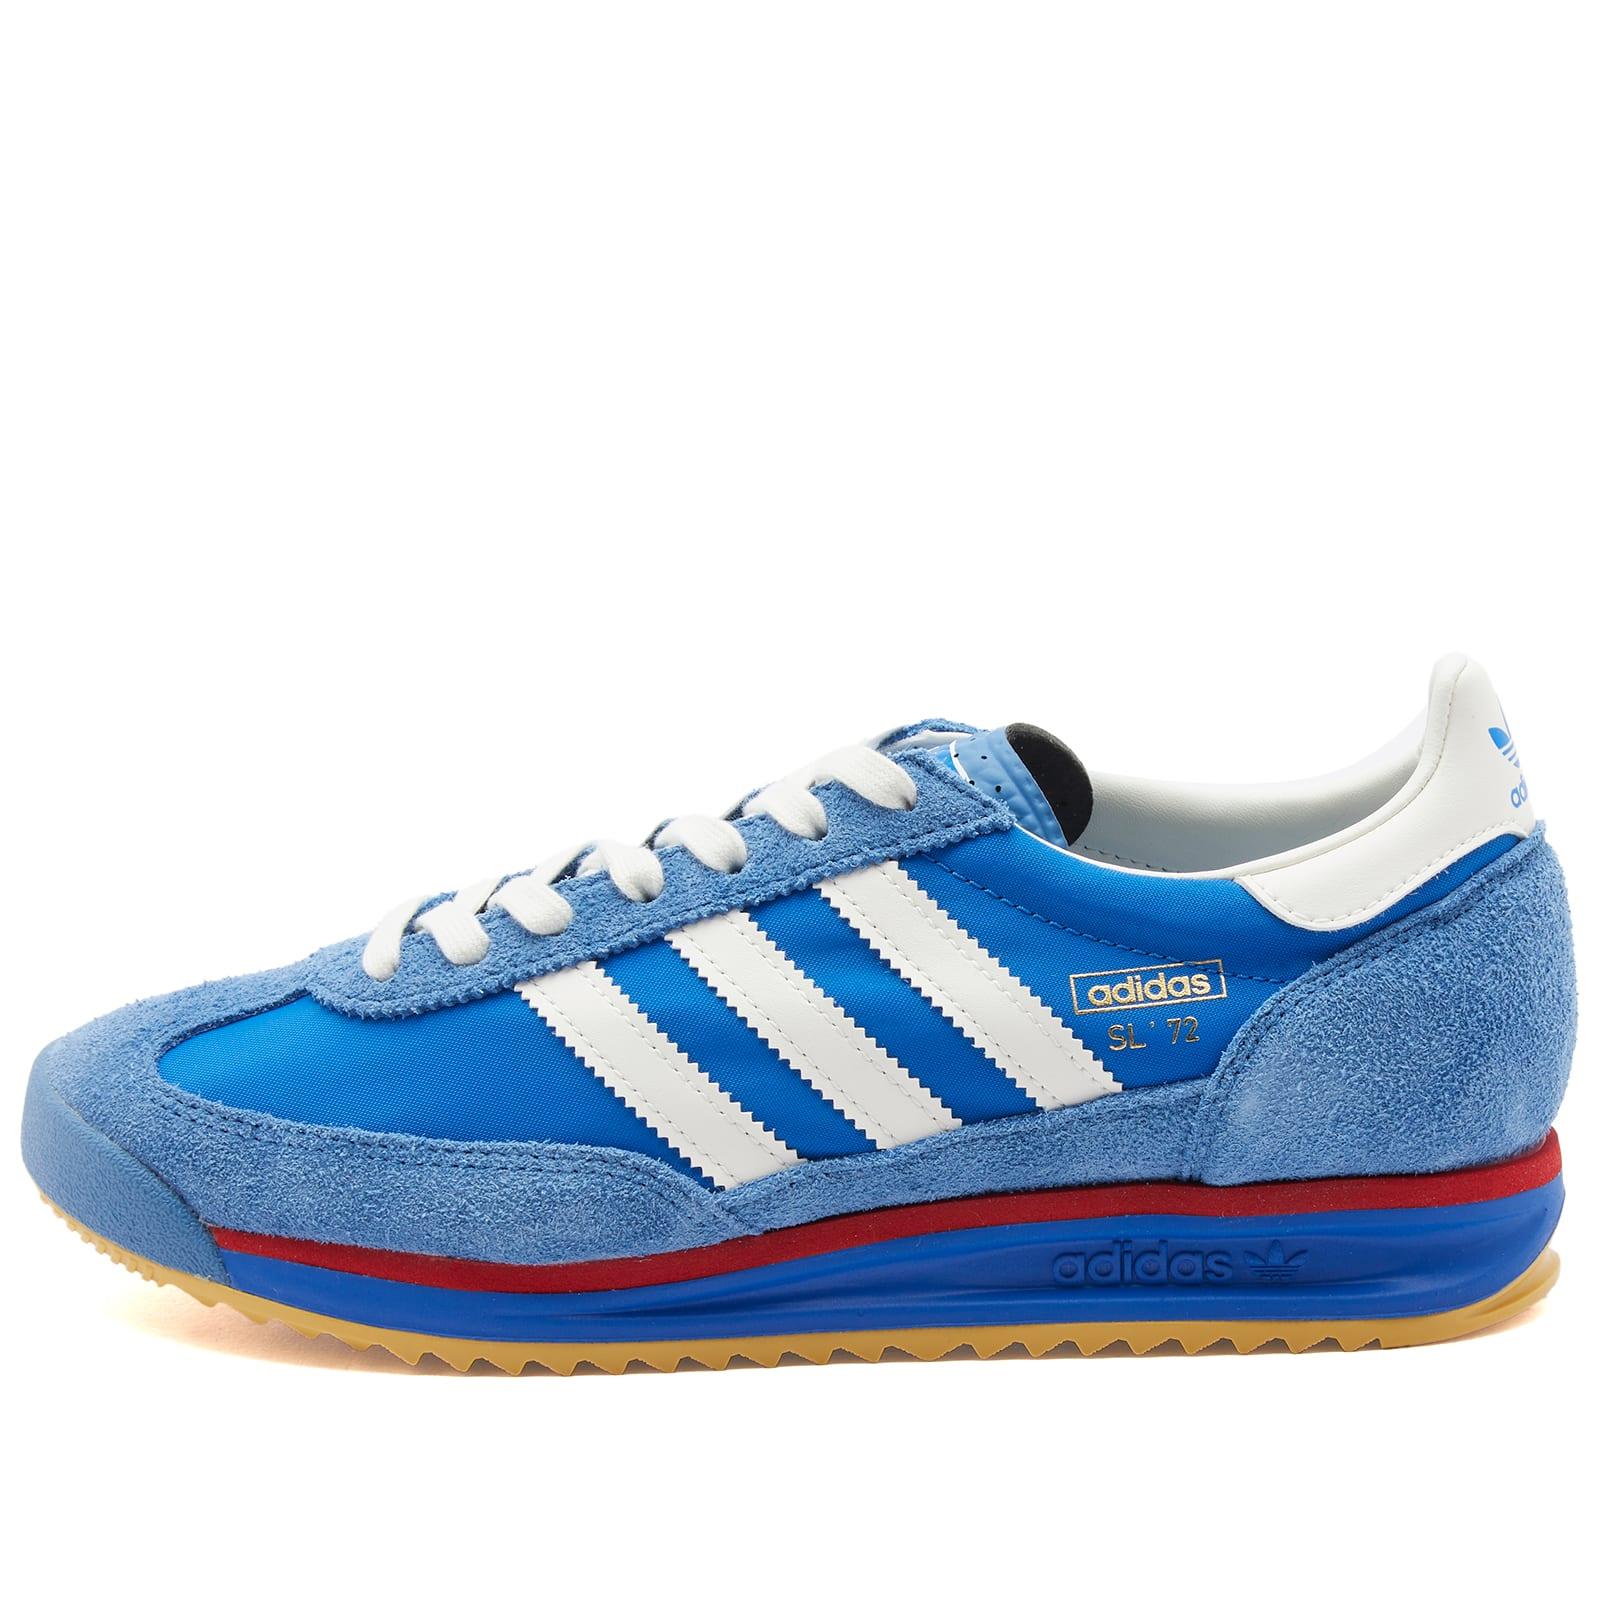 adidas Sl 72 Rs Sneakers in Blue | Lyst